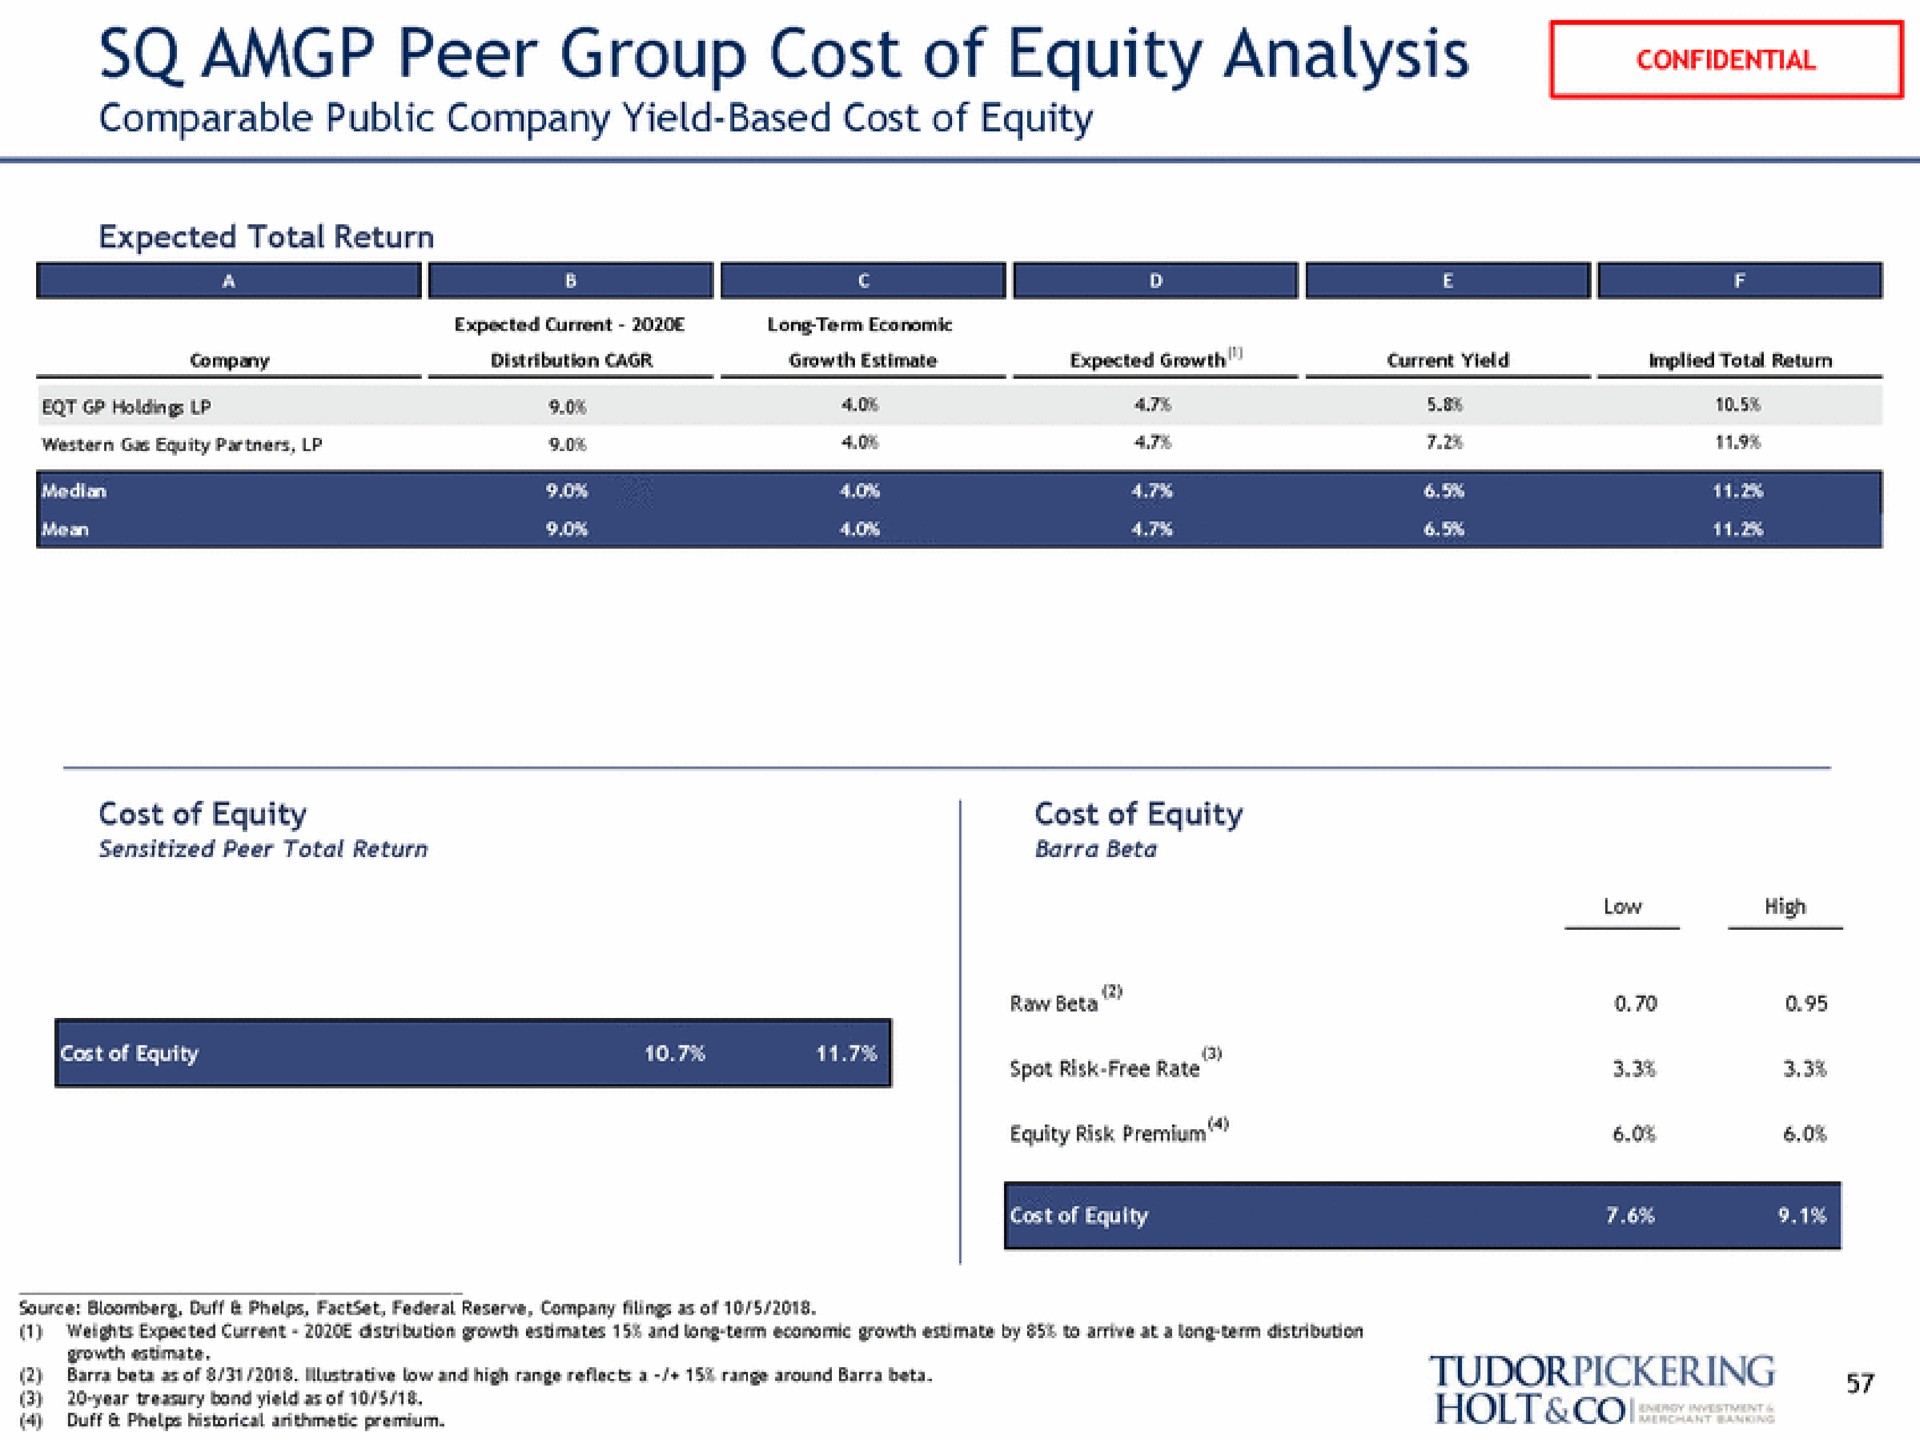 peer group cost of equity analysis comparable public company yield based cost of equity | Tudor, Pickering, Holt & Co